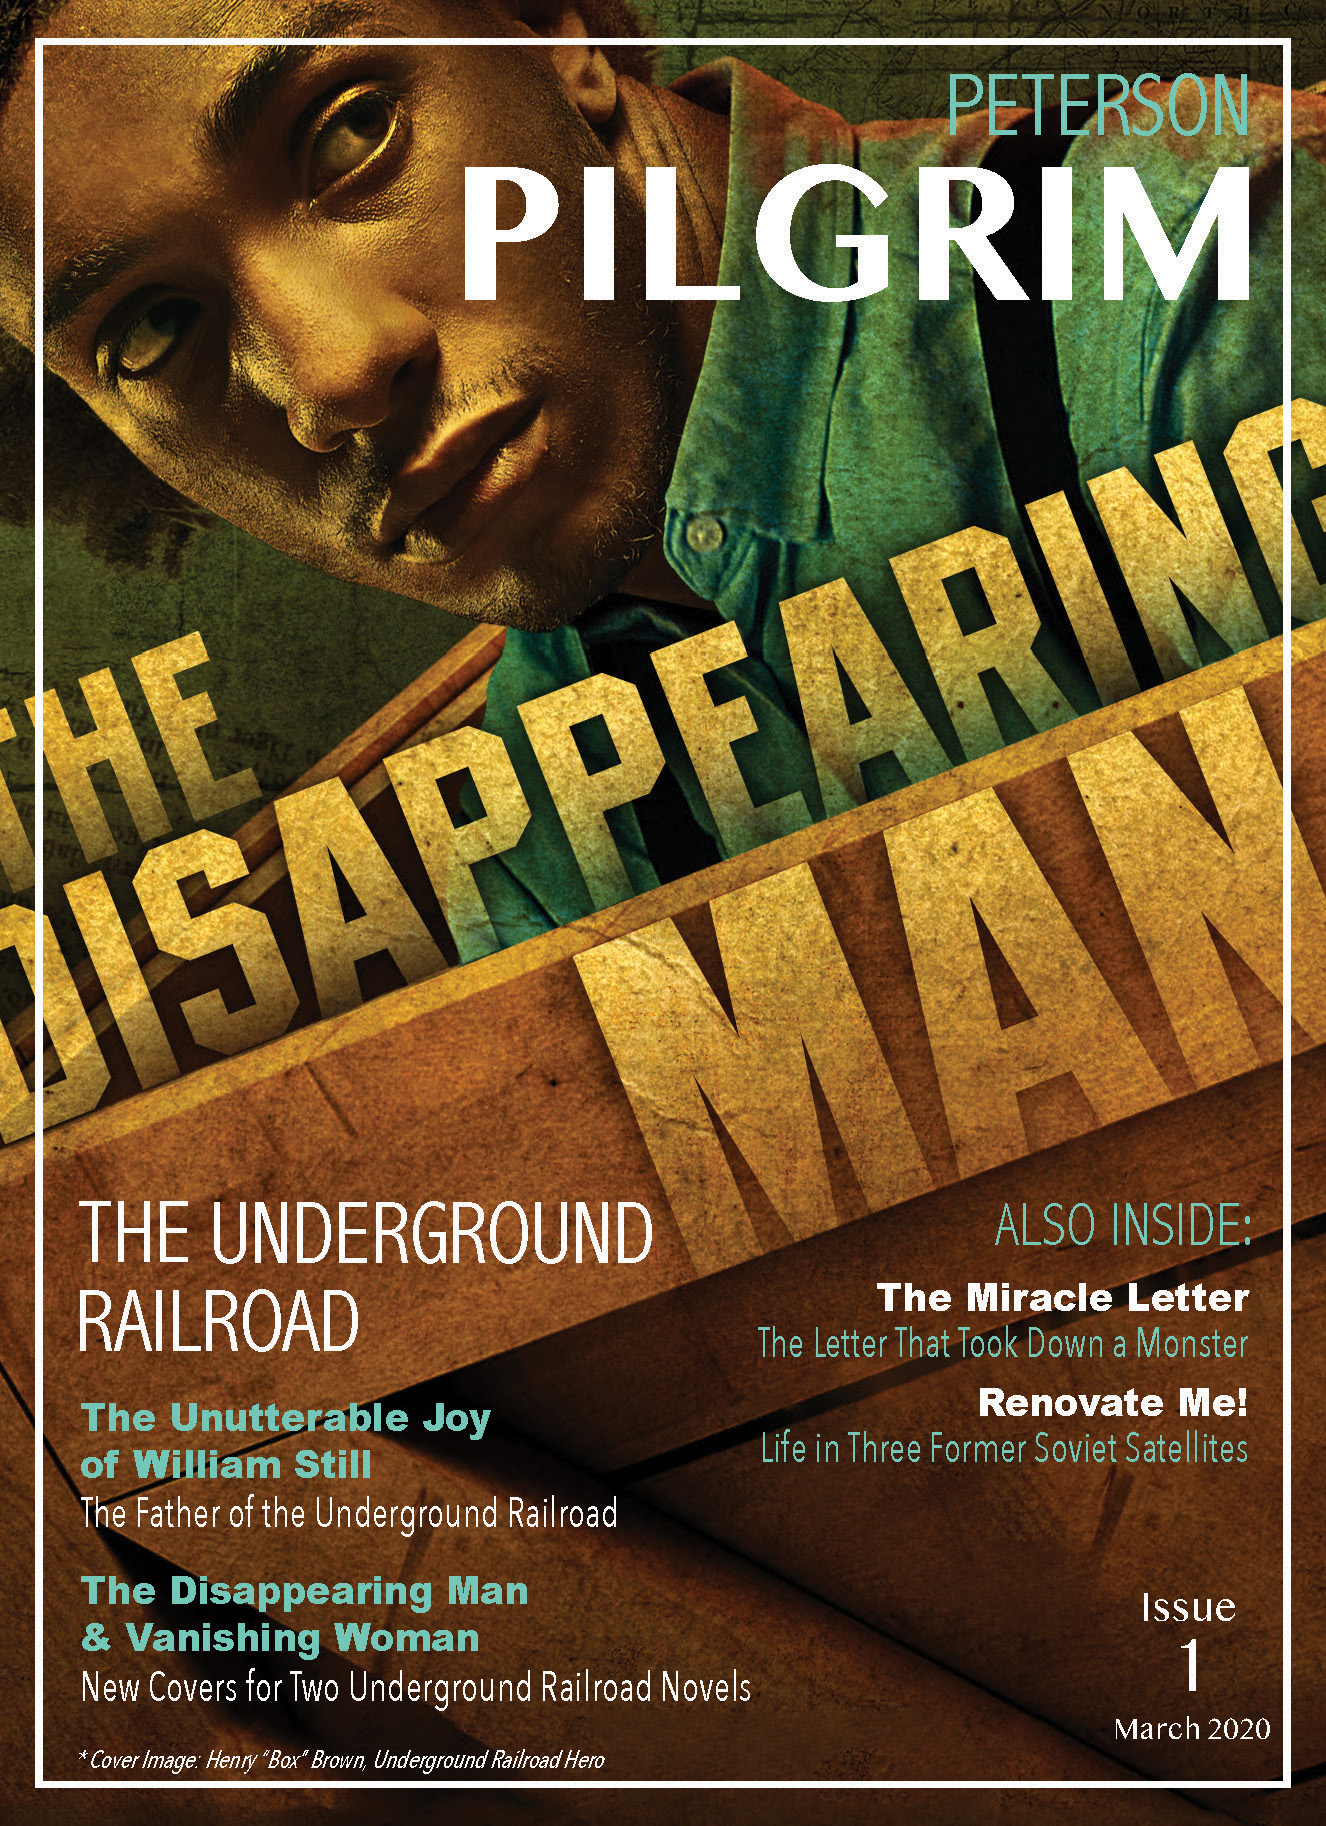 Image of the cover of the first issue of Peterson Pilgrim Magazine